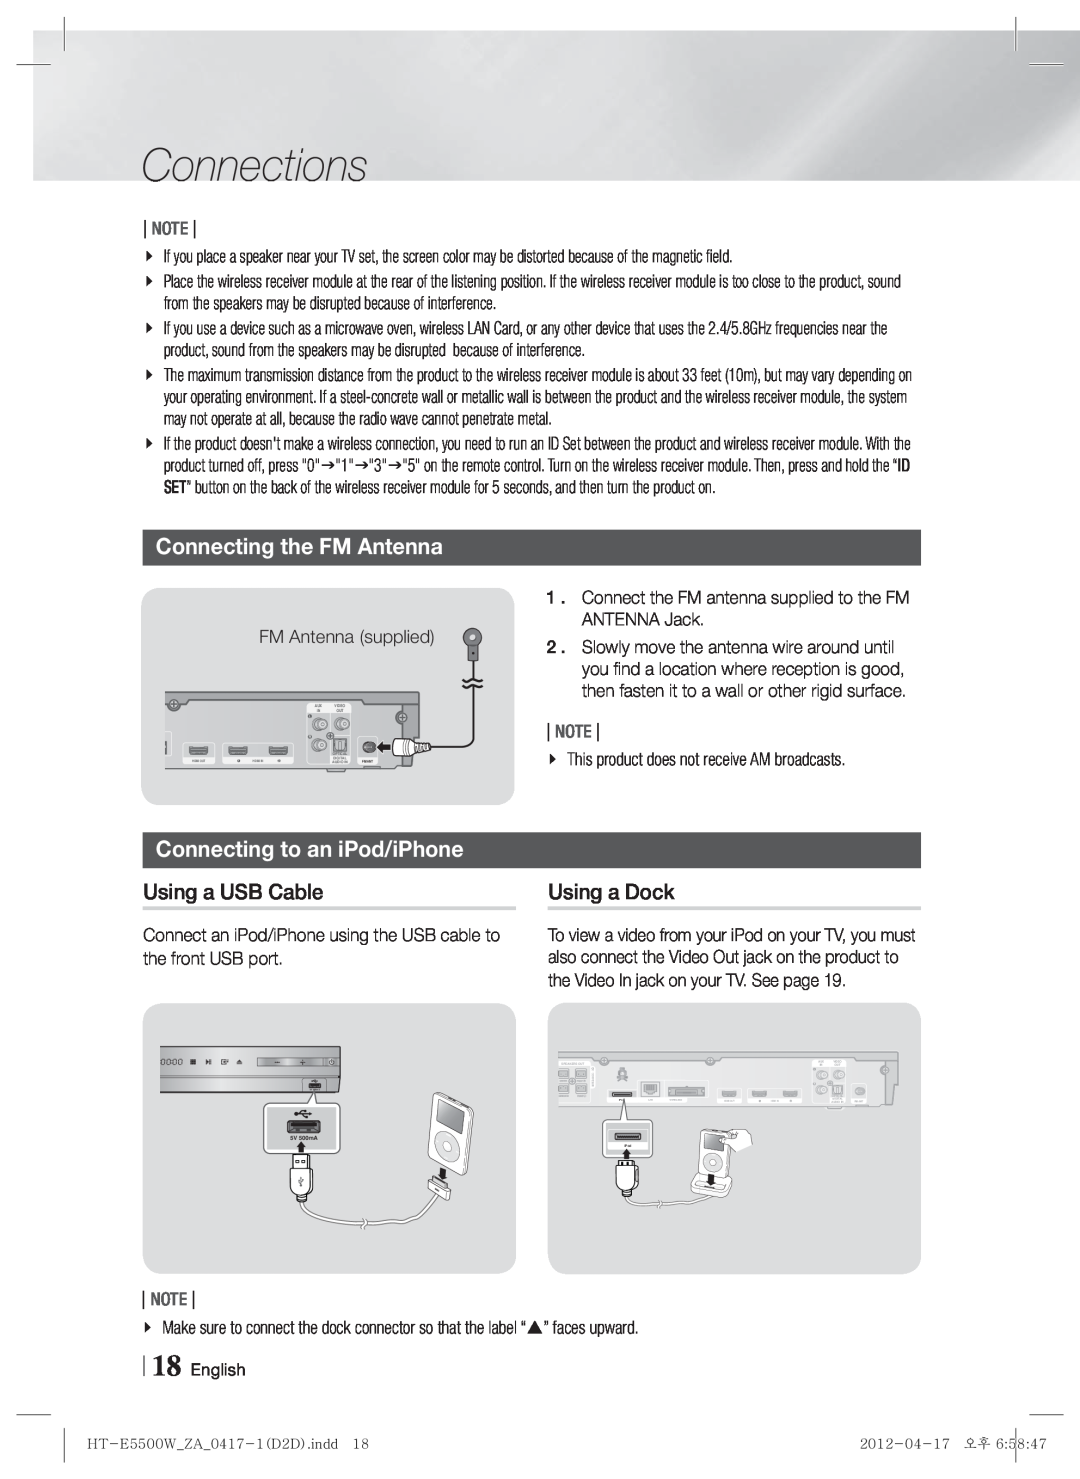 Samsung HT-E550 user manual Connecting the FM Antenna, Connecting to an iPod/iPhone, Connections, Note 